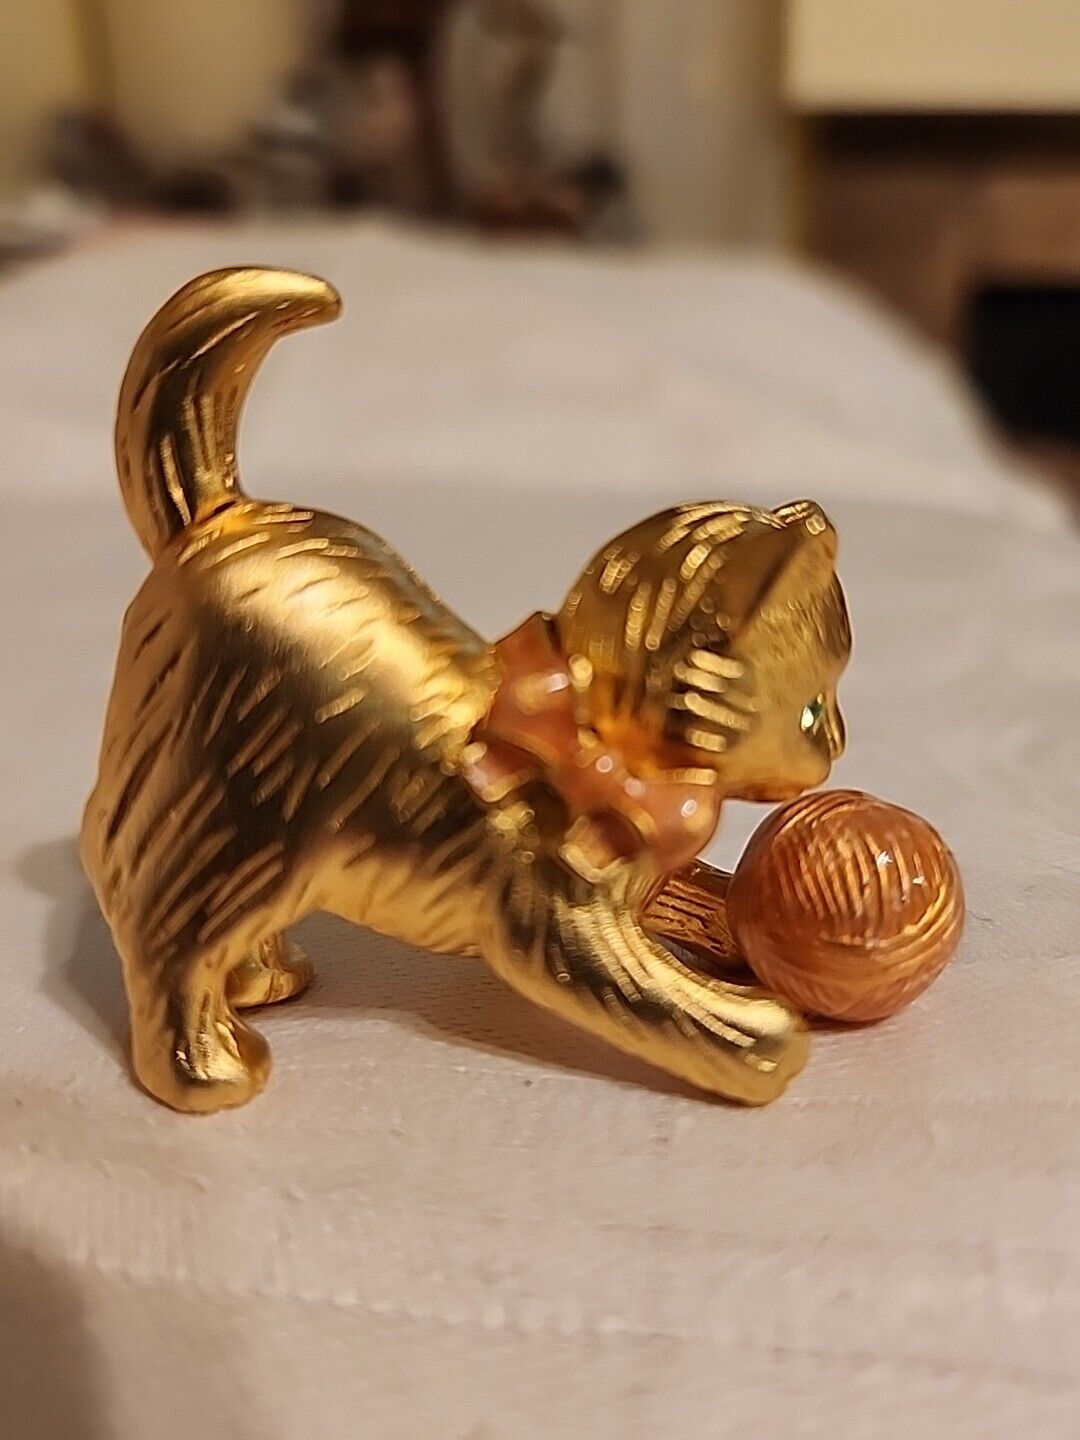 ESTEE LAUDER 2000 BRUSHED GOLD KITTY FIGURINE W/ SOLID PERFUME